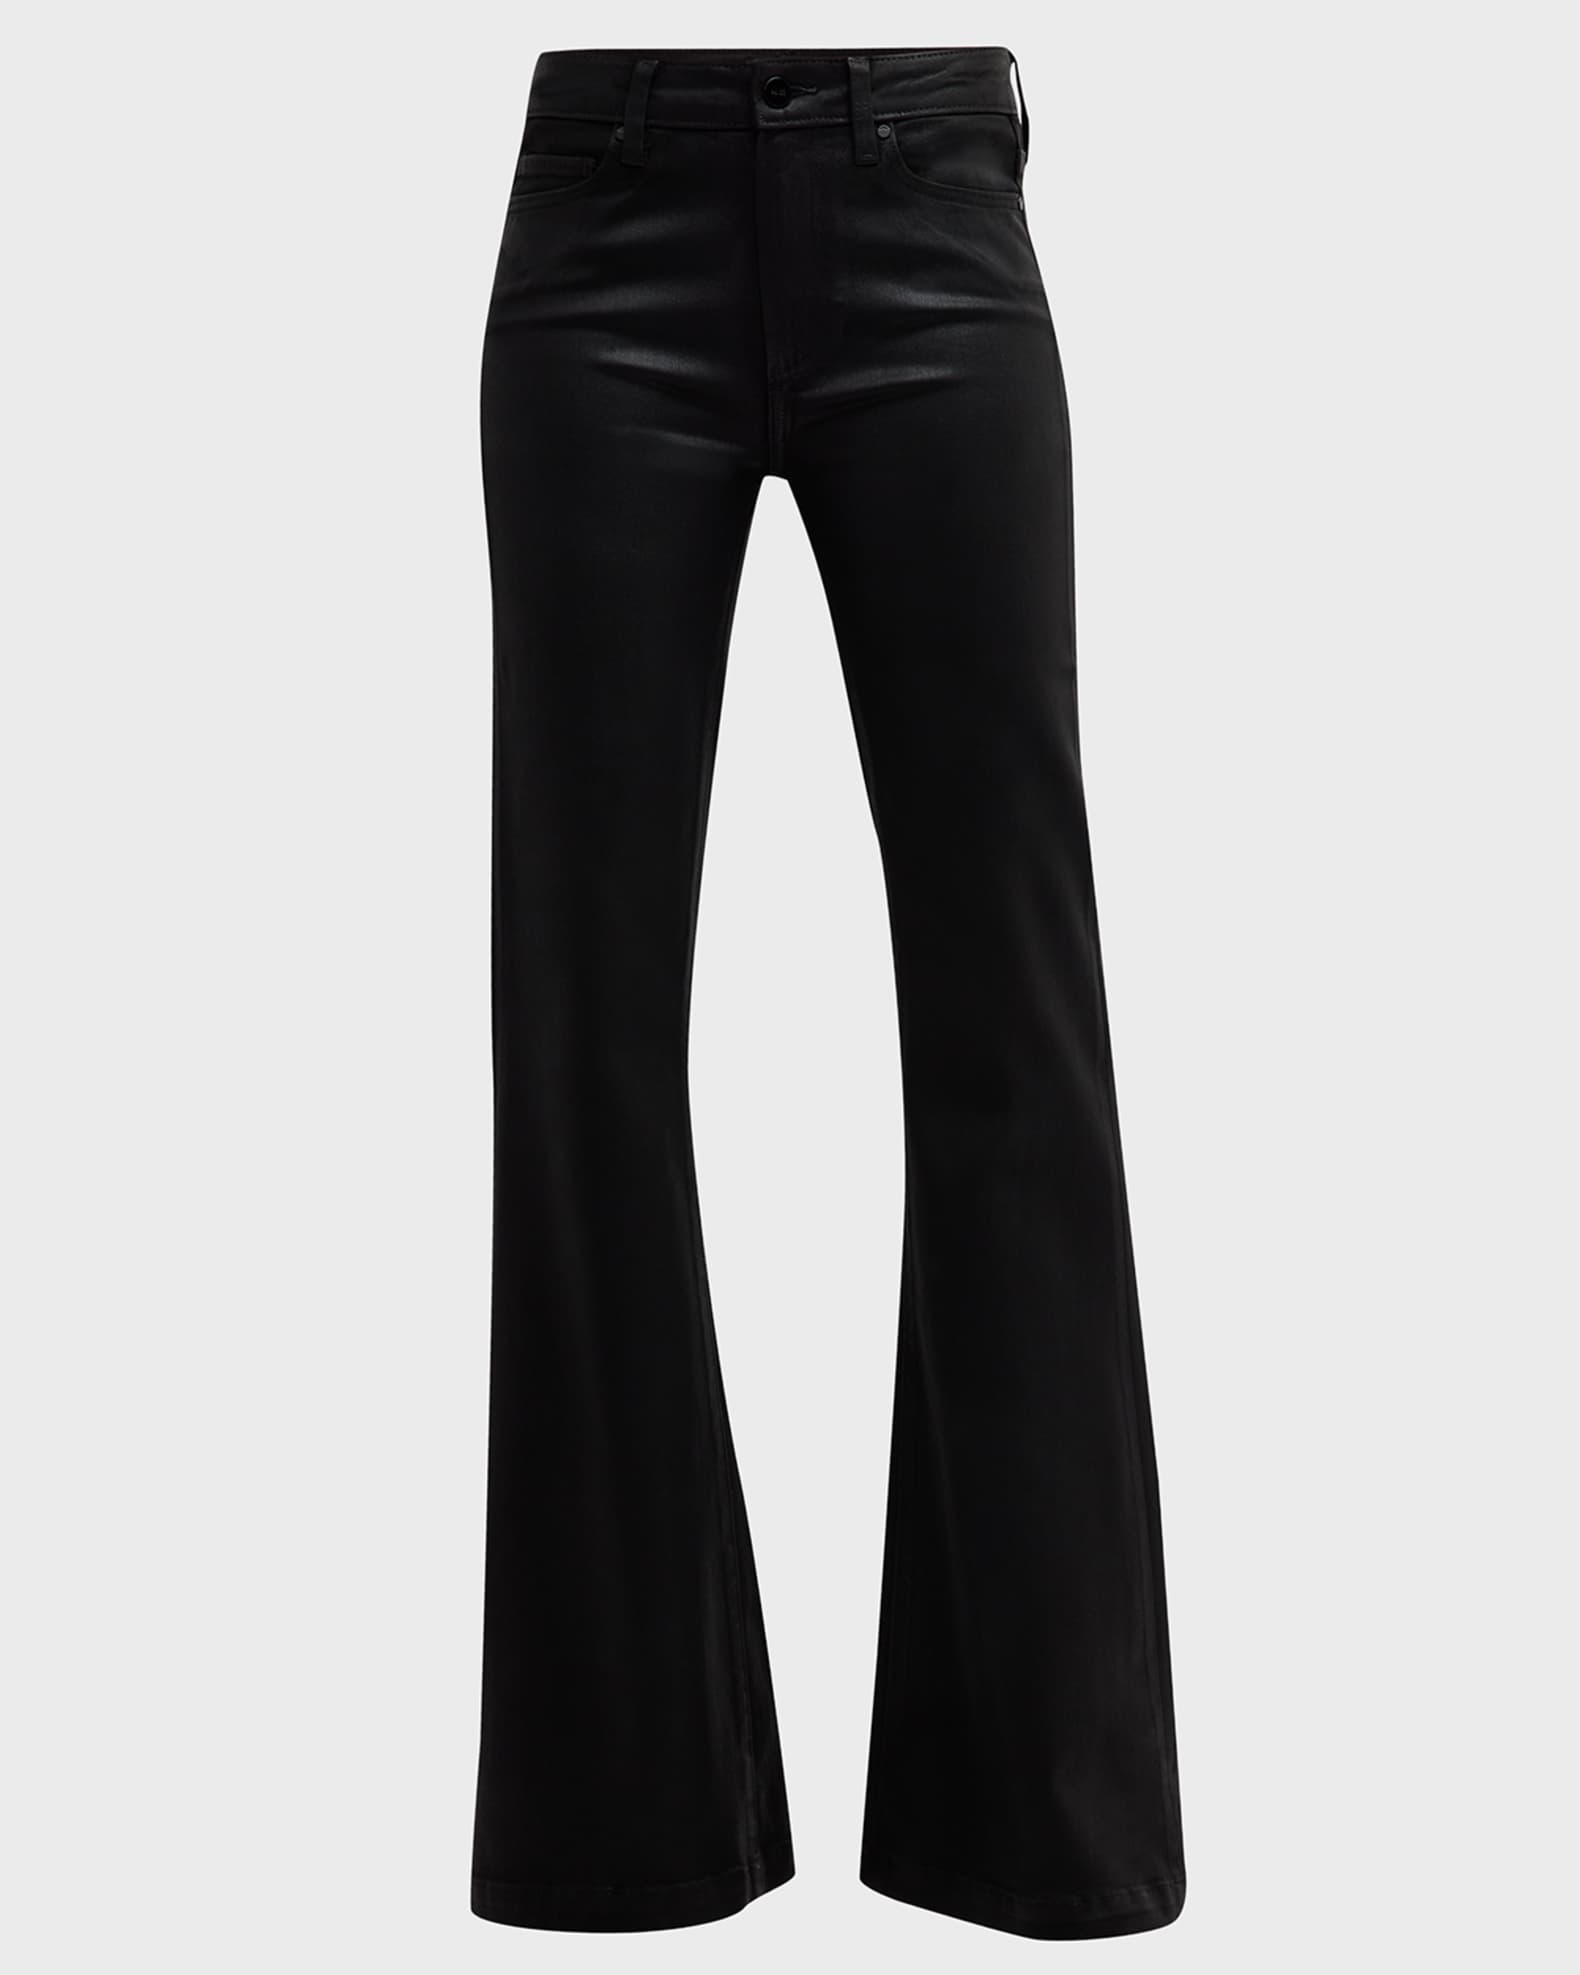 PAIGE Genevieve Flare Coated Jeans | Neiman Marcus